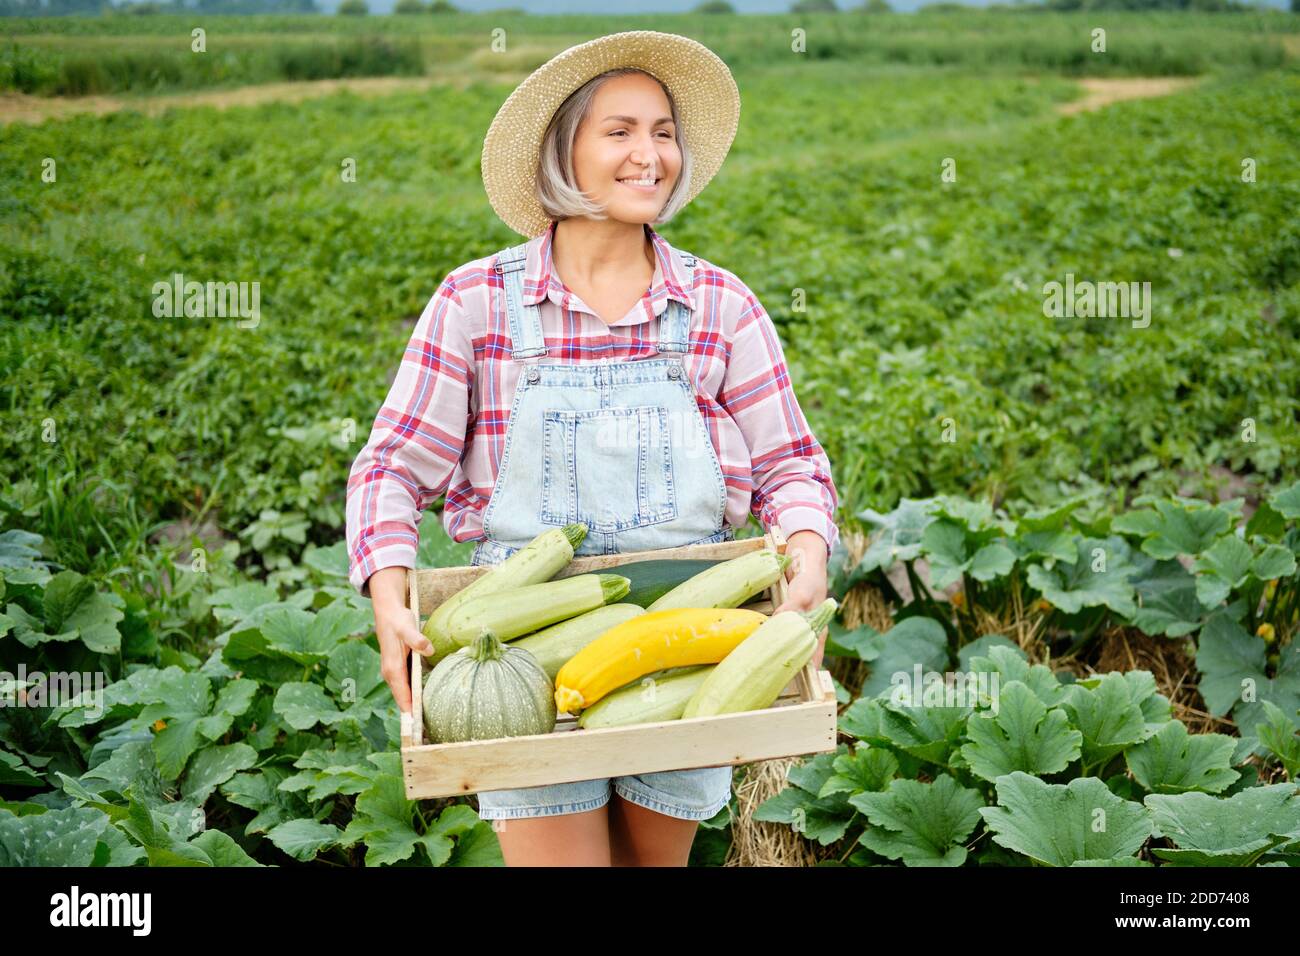 Cute girl in wearing Hat Picking Freshest Squash and Zucchini in a Garden. Autumn Vegetable Harvest Stock Photo